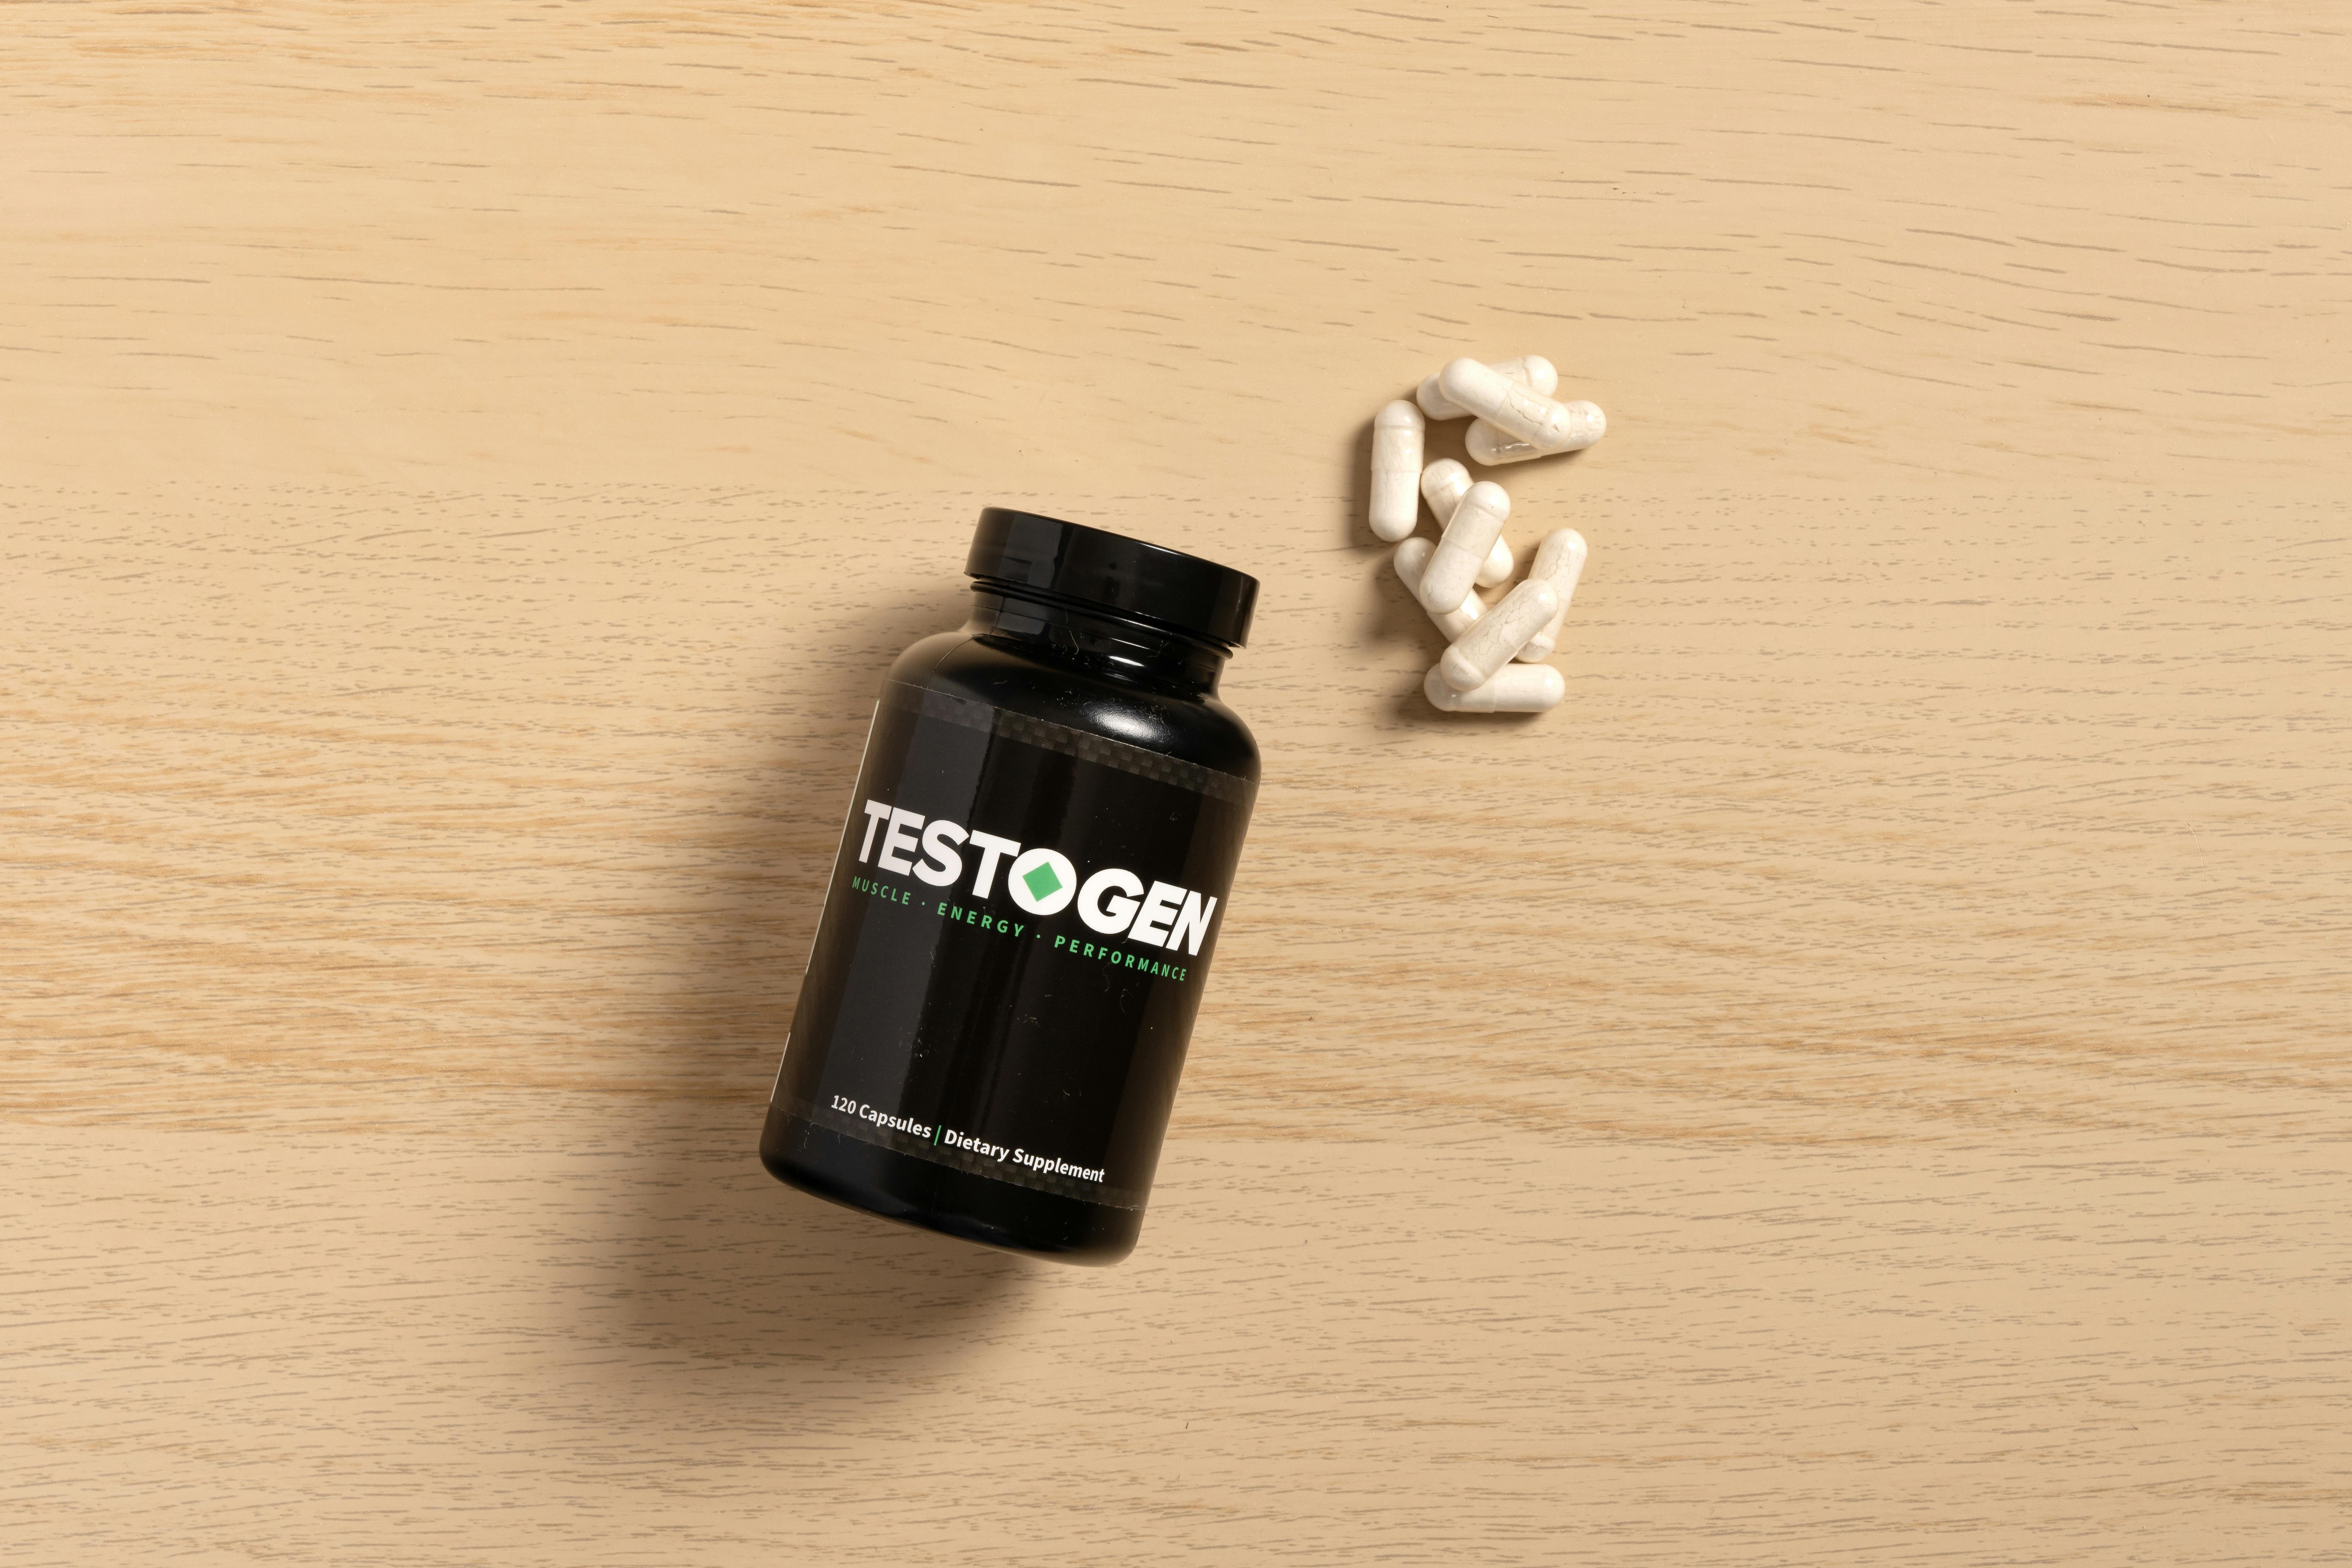  boostULTIMATE - #1 Rated Testosterone Booster Pills